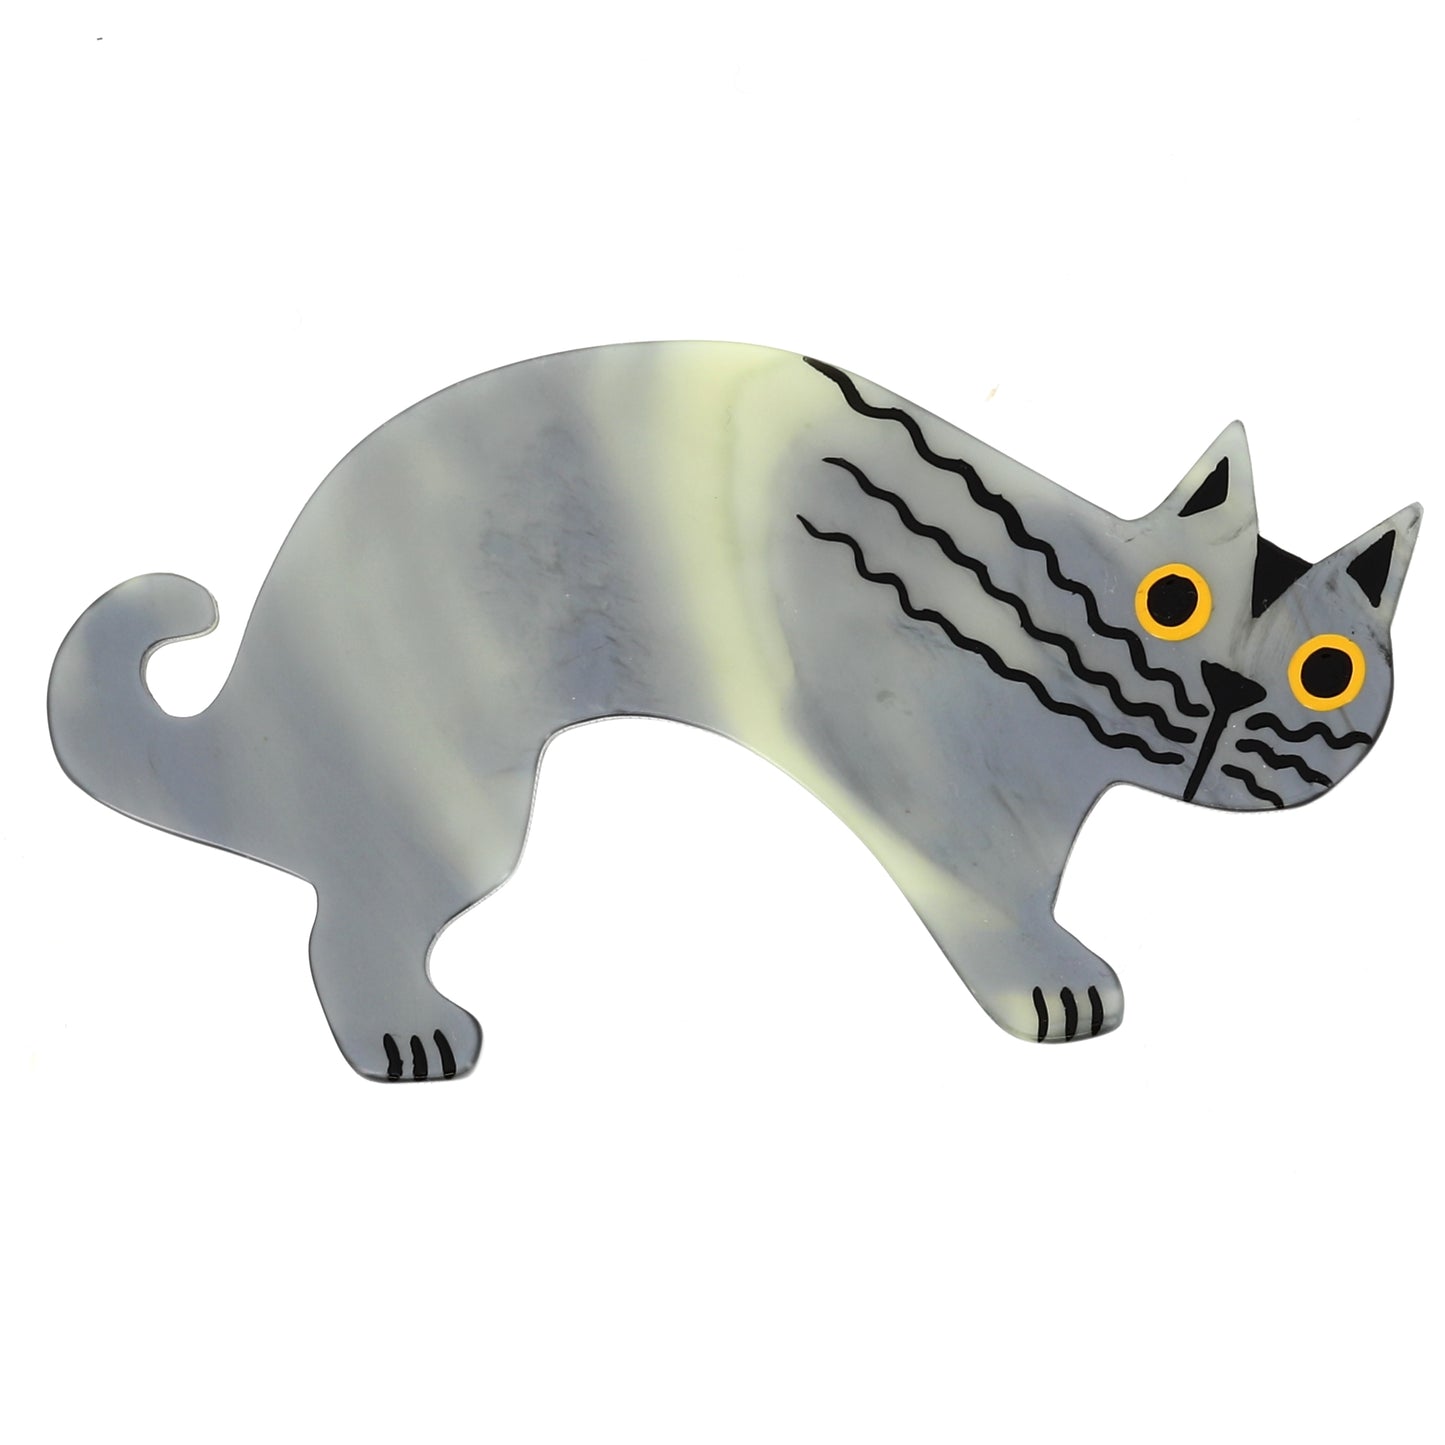 Grey and Light Yellow Raspoutine Cat Brooch in galalith